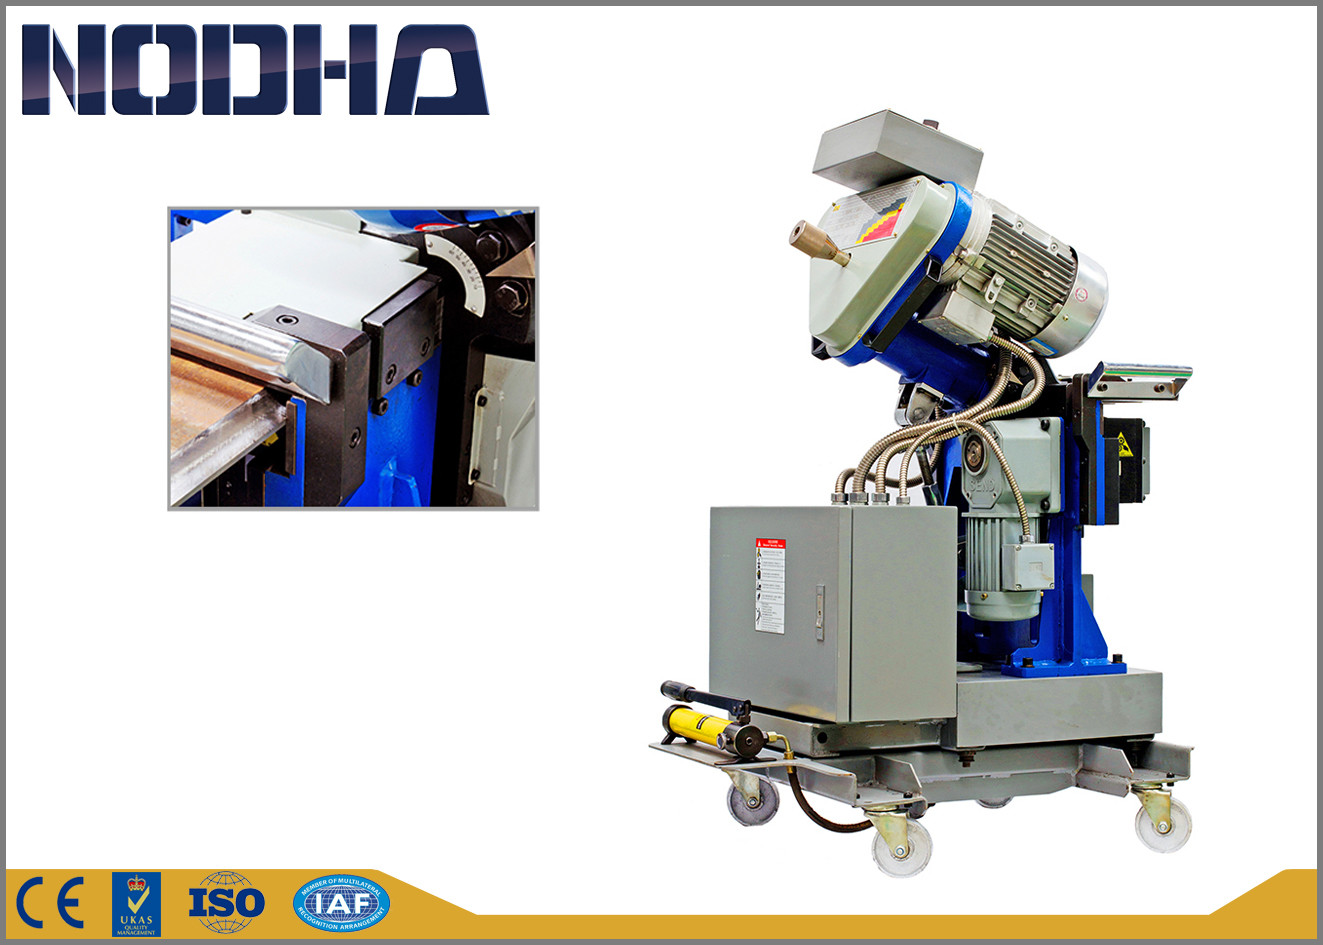 4800W Cold Cutting Plate Edge Milling Machine For Aerospace Industry